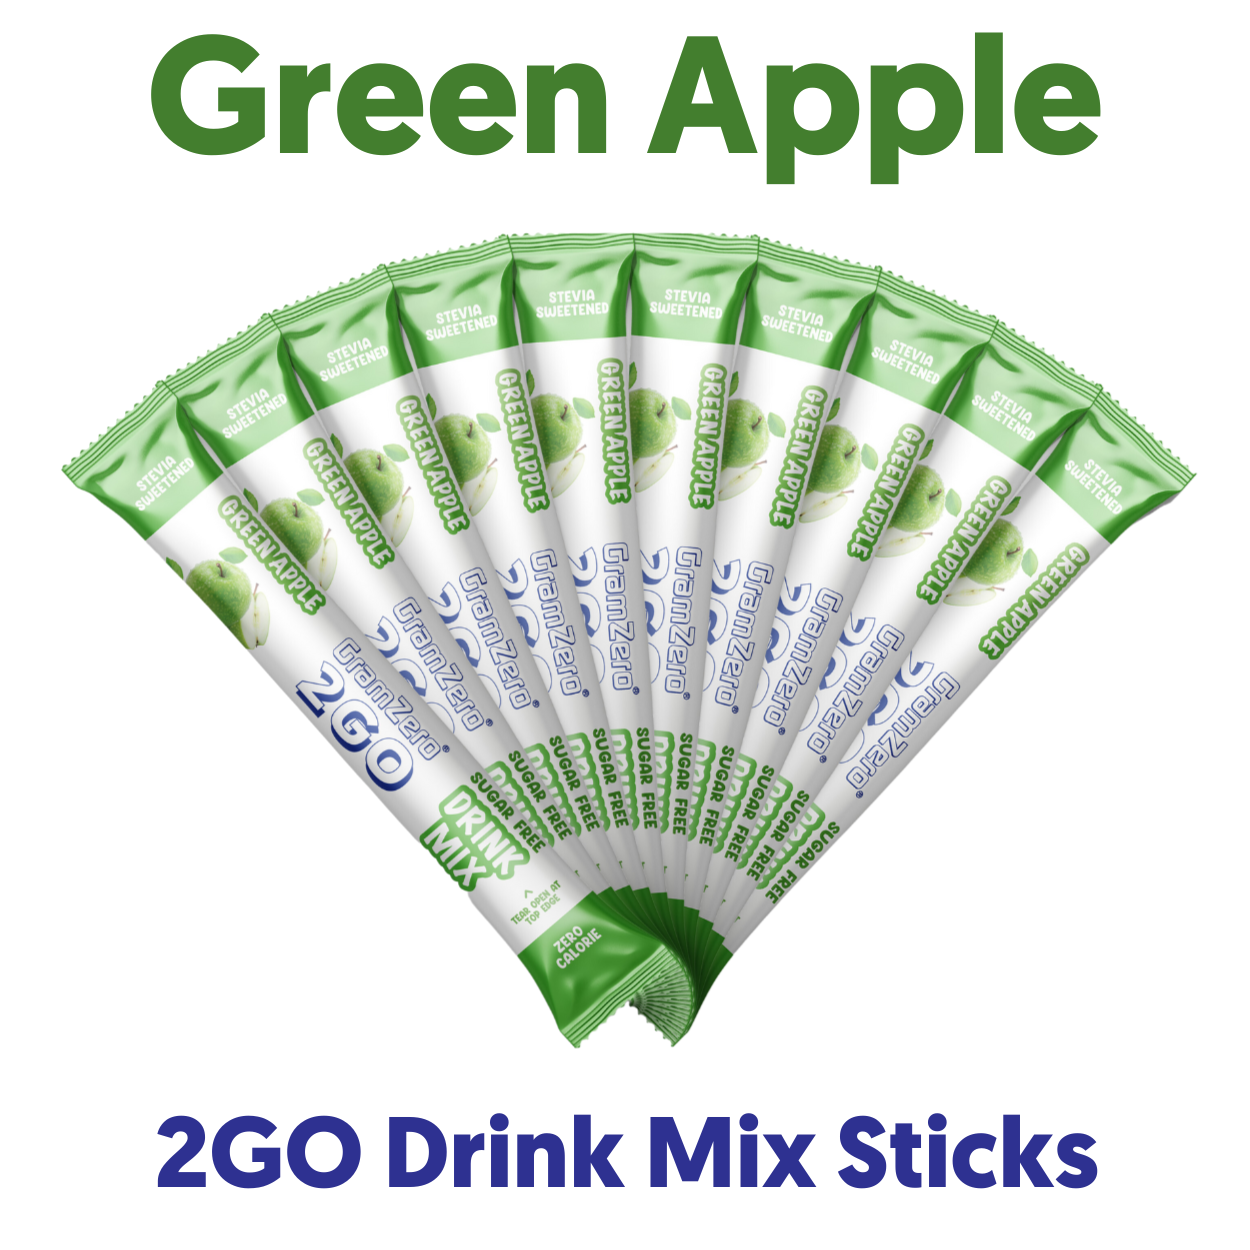 GREEN APPLE 2GO Sugar Free Drink Mix Sticks: 10 Pack ~ Great for Loaded Tea Kits